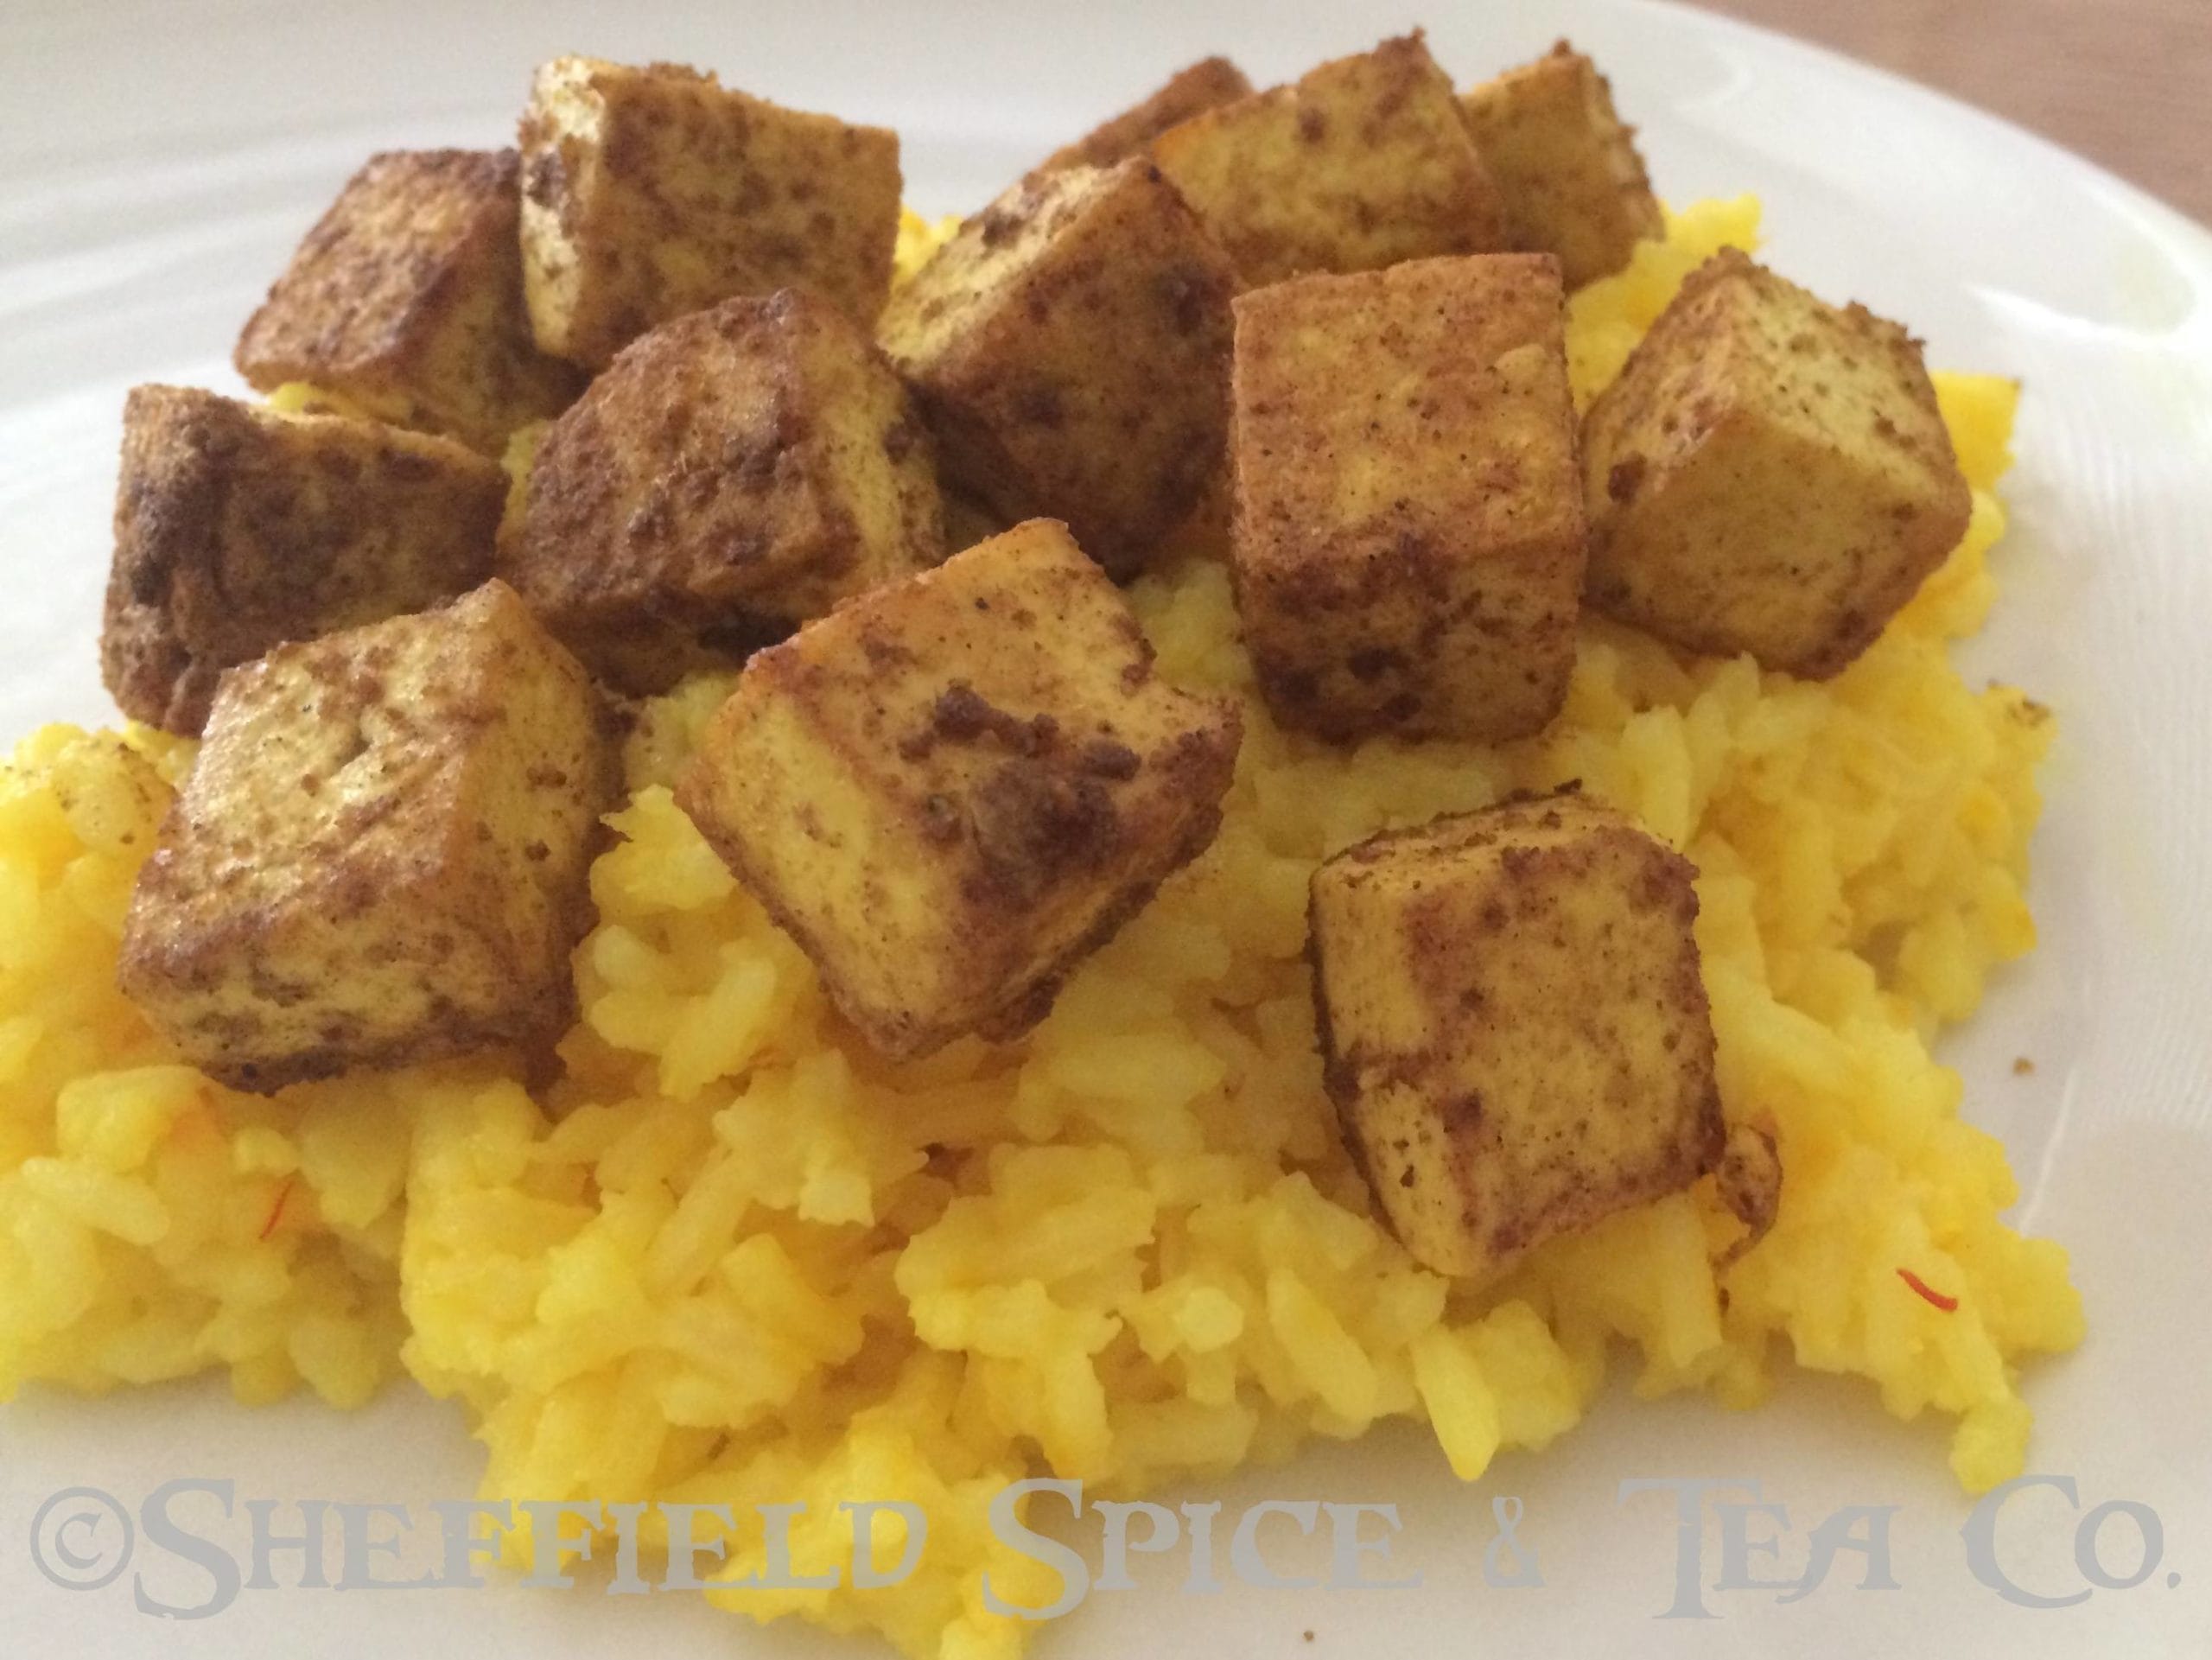 madras curry chicken or tofu with saffron rice